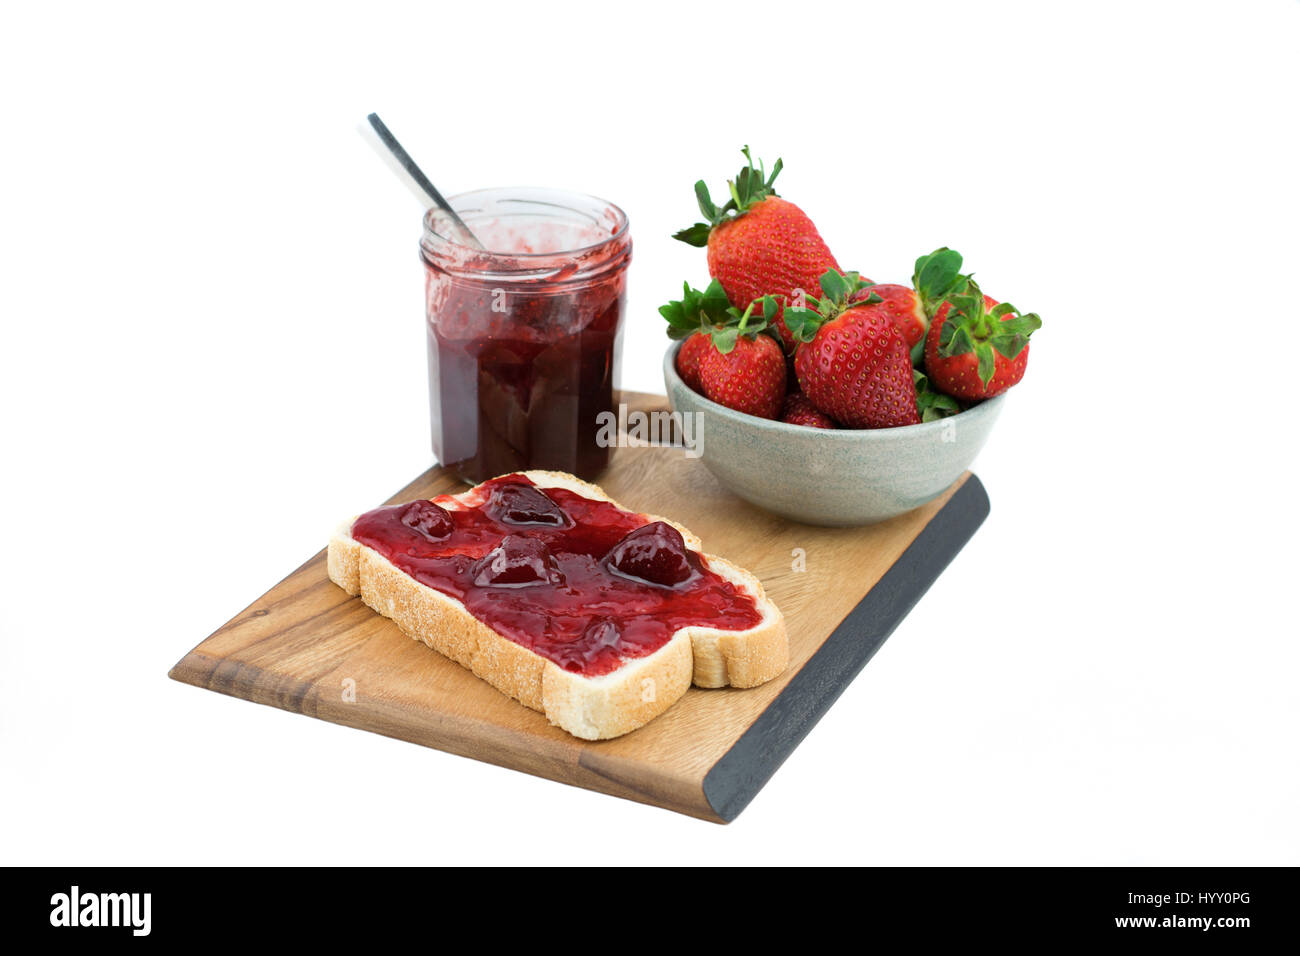 Bread with strawberry jam on a wooden board. Tasty breakfast. Ripe strawberries isolated on white background. Stock Photo